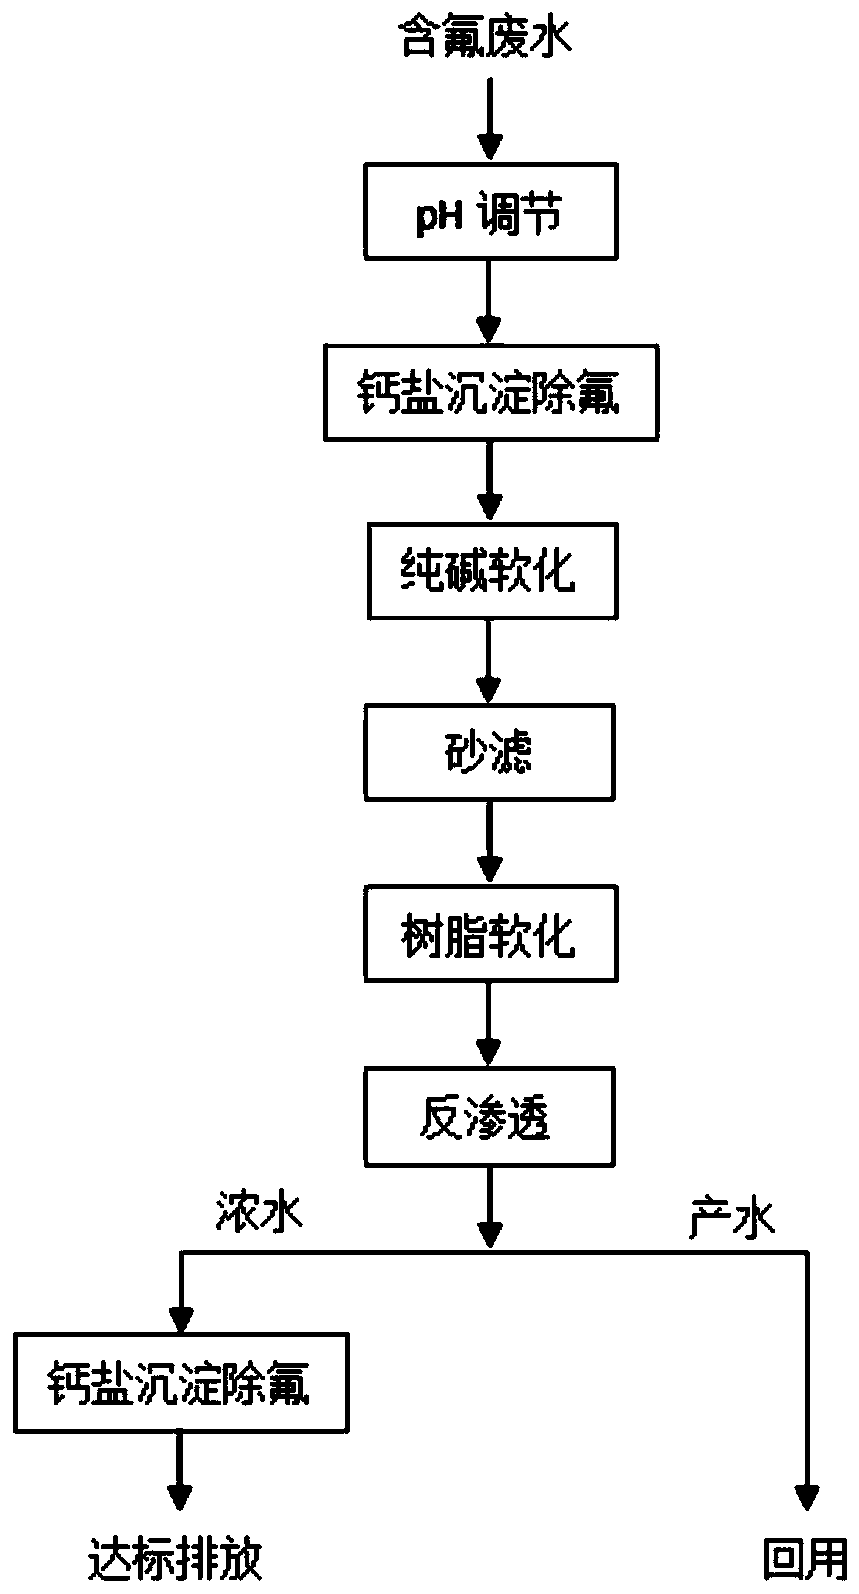 Fluorine-containing wastewater treatment device and process for liquid crystal display panel production plant